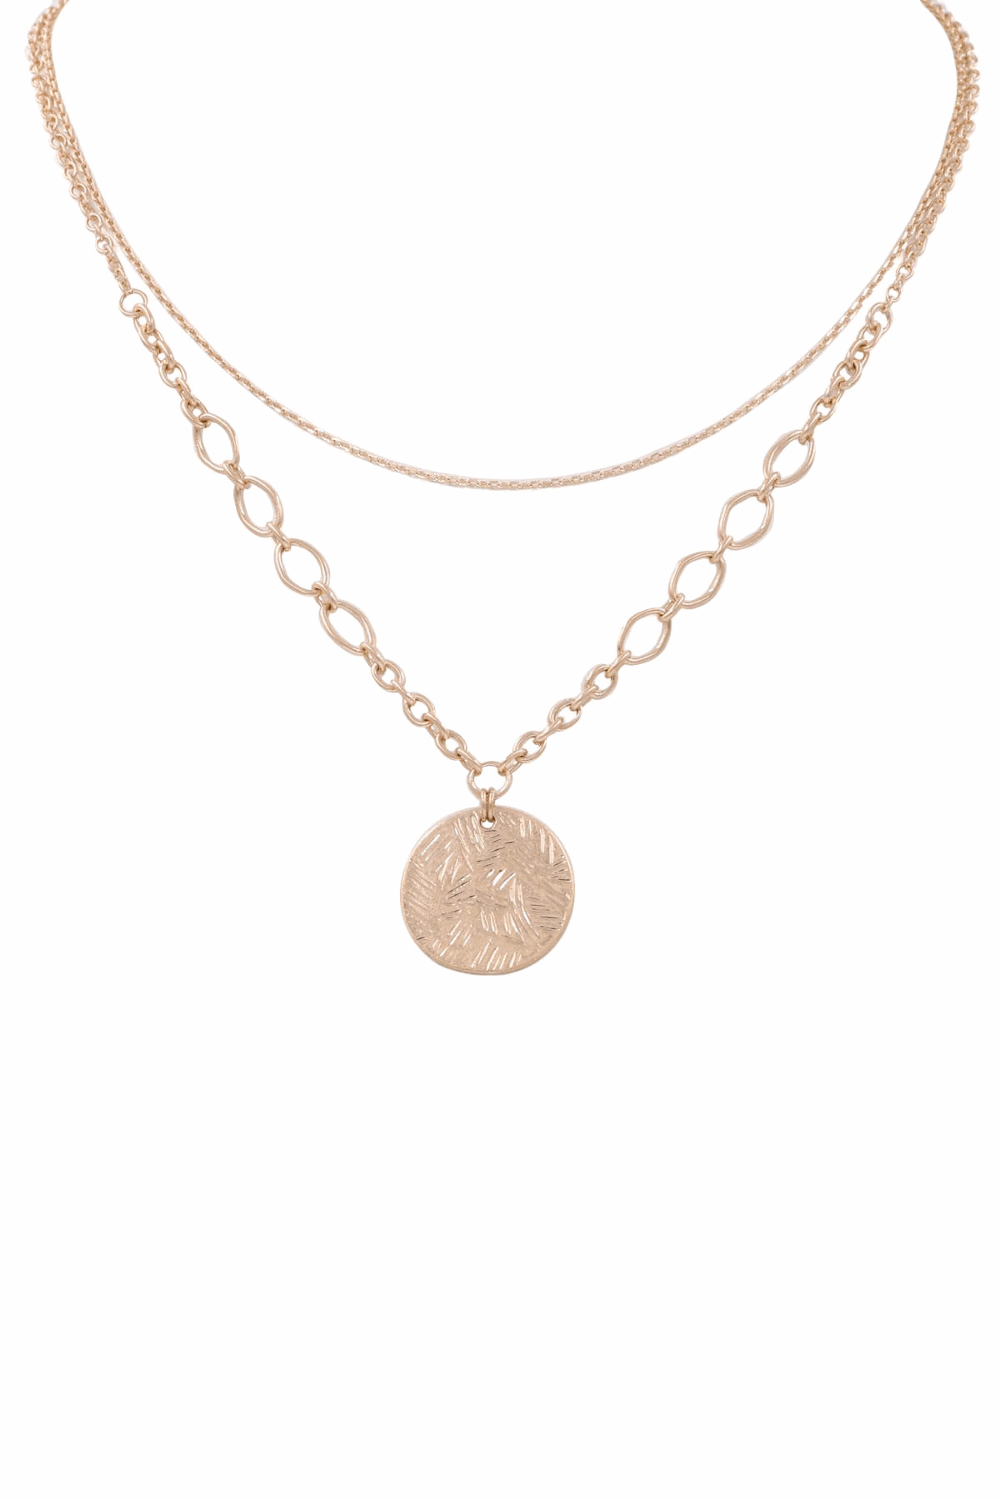 Metal Disc Pendant Layered Chain Necklace-Worn Gold